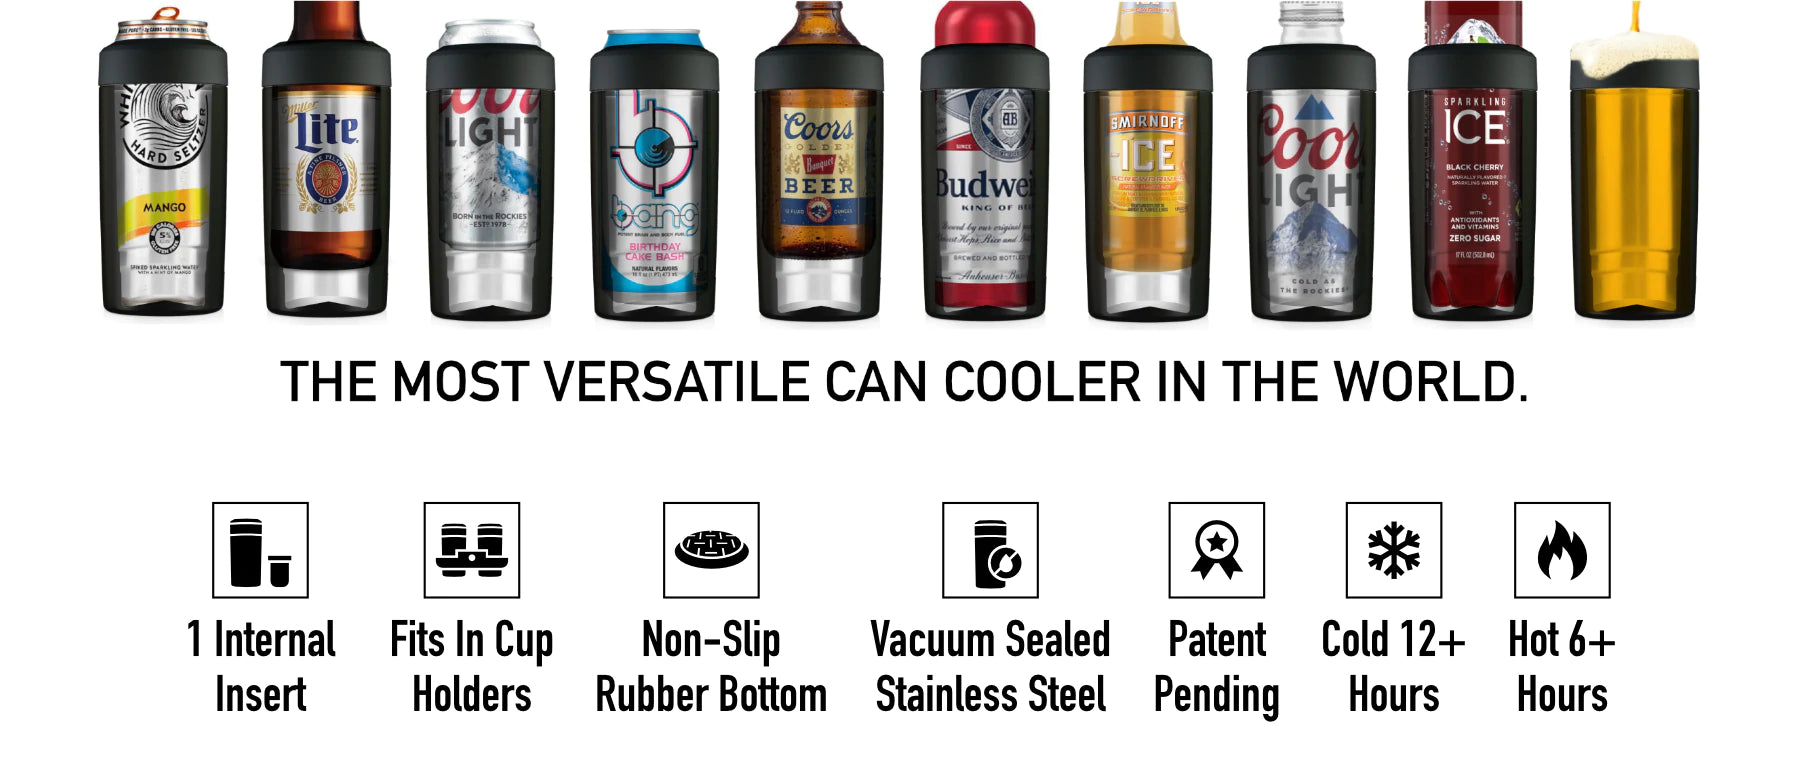 Universal Buddy 2.0 Can Cooler - The Simple Man